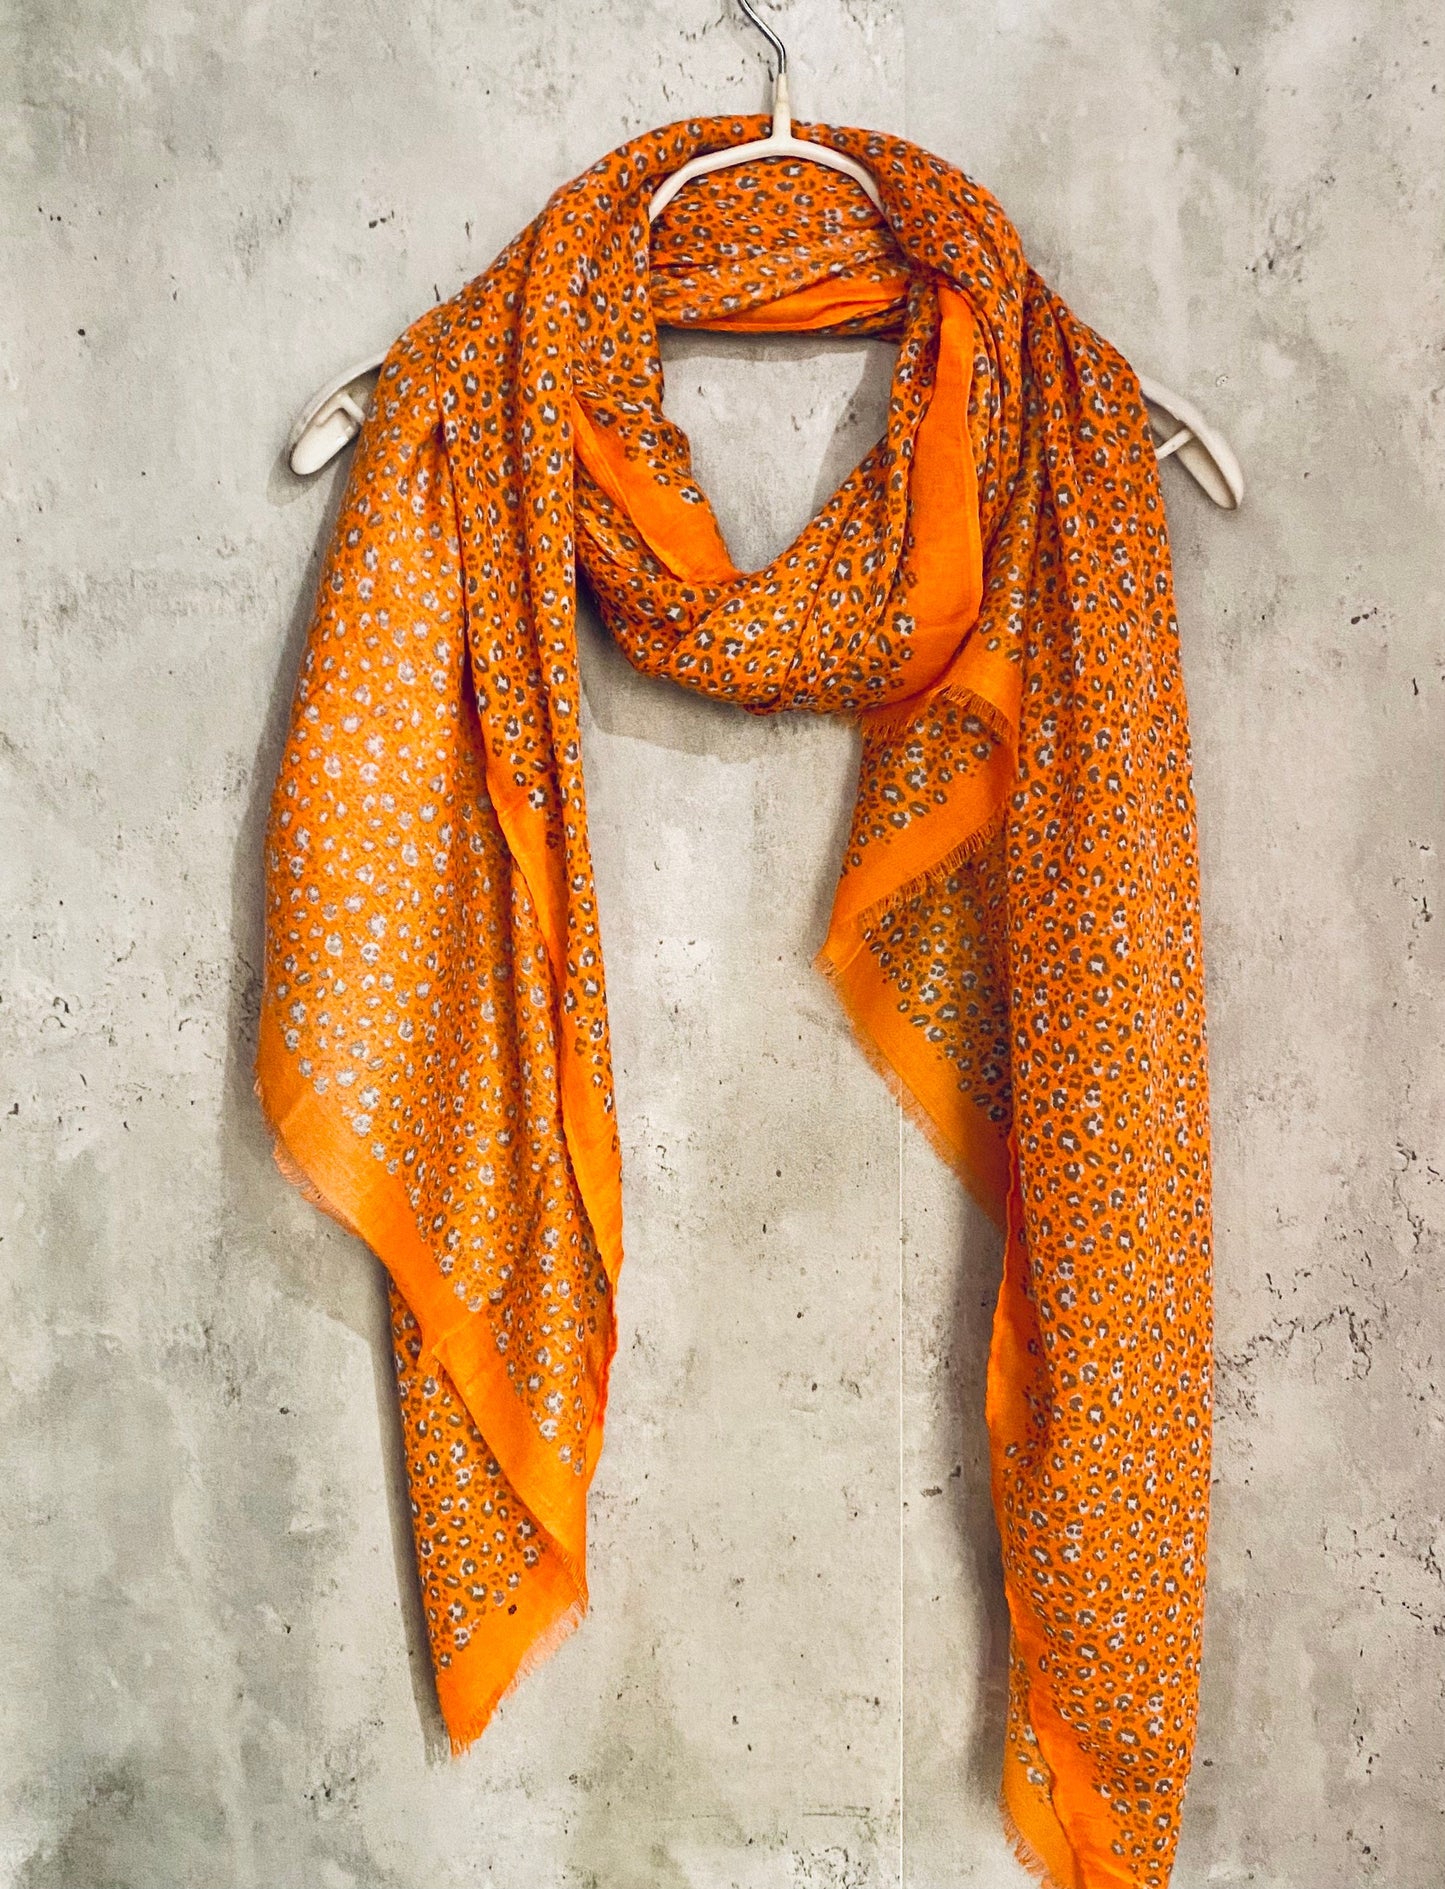 Small leopard Pattern Orange Cotton Scarf/Spring Summer Autumn Scarf/UK Seller/Scarf Women/Gifts For Mom/Gifts For Her Birthday/Christmas